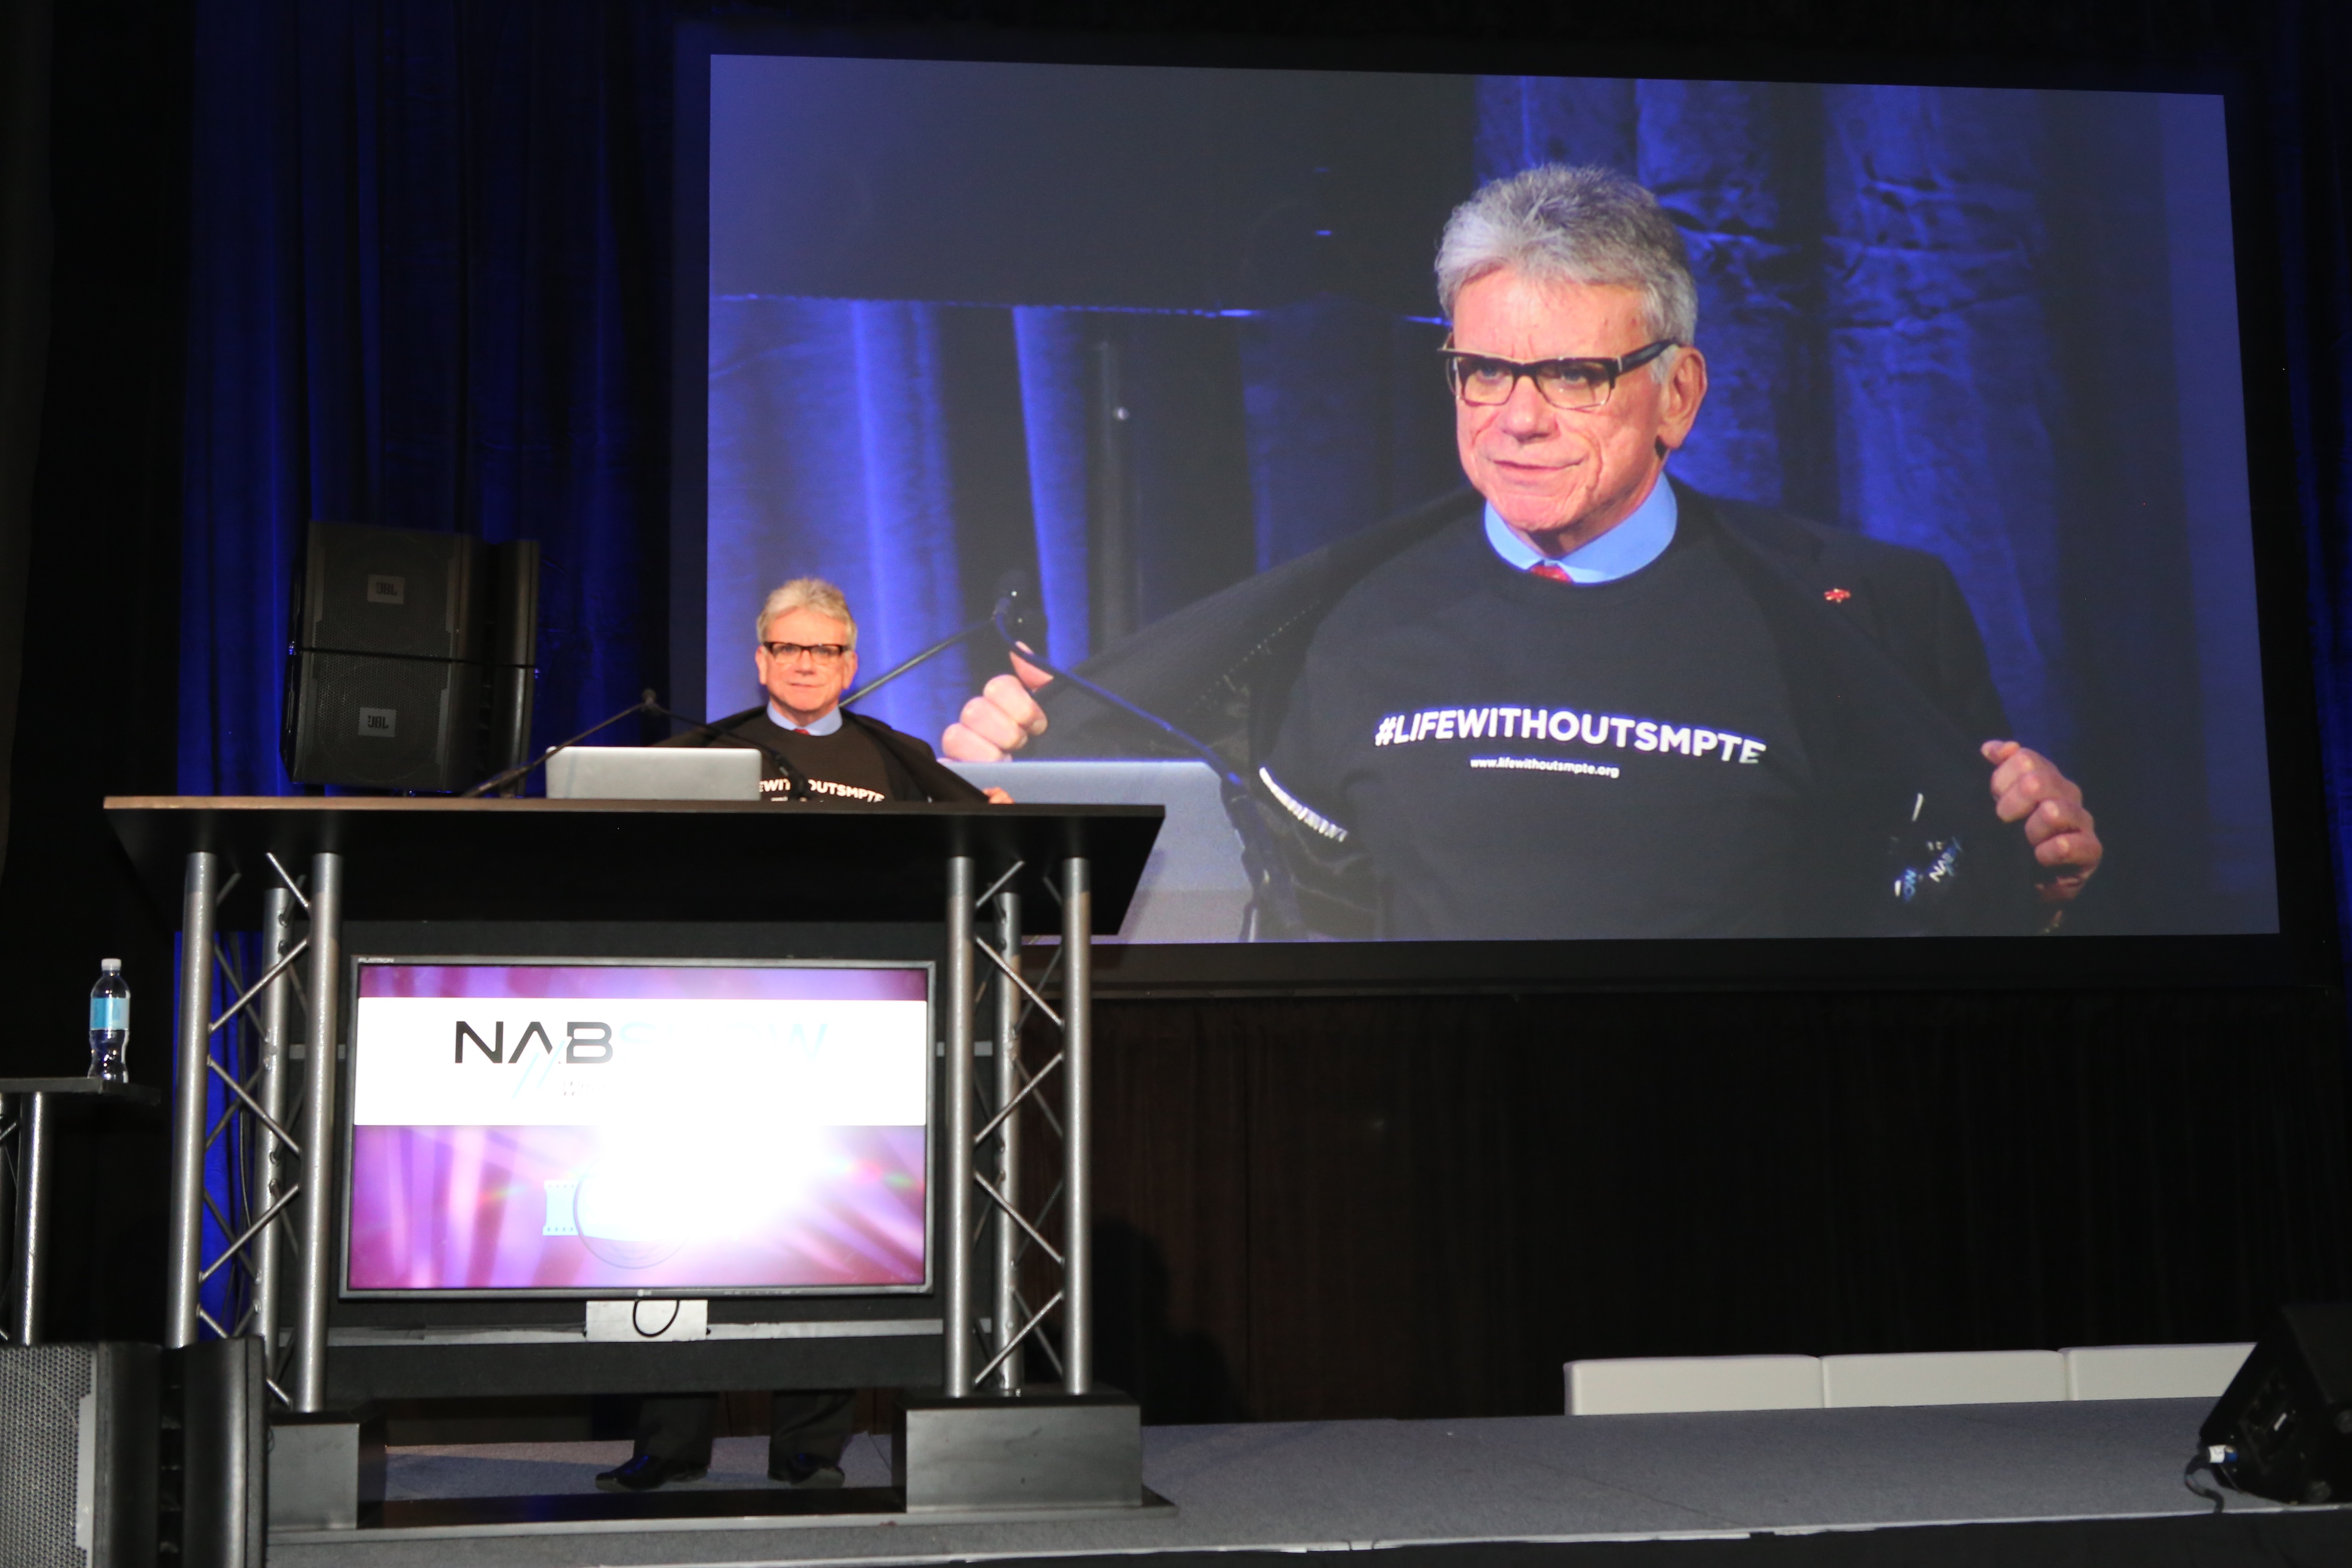 SMPTE Education Vice President, Pat Griffis Announces #LIFEWITHOUTSMPTE Public Awareness Campaign (Photo Credit: Robb Cohen Photography, Courtesy of NAB)